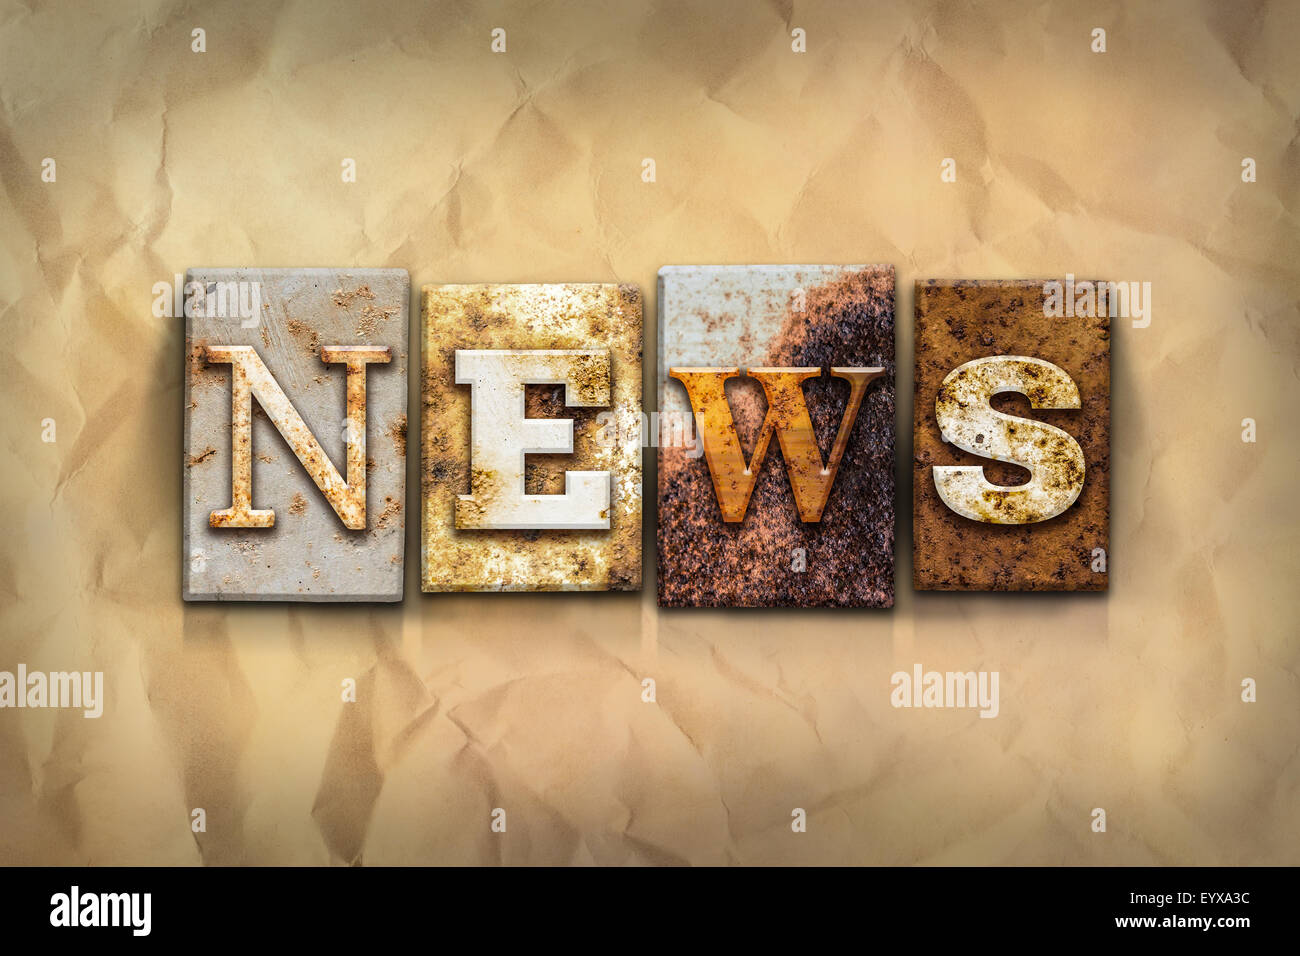 The word "NEWS" written in rusty metal letterpress type on a crumbled aged paper background. Stock Photo